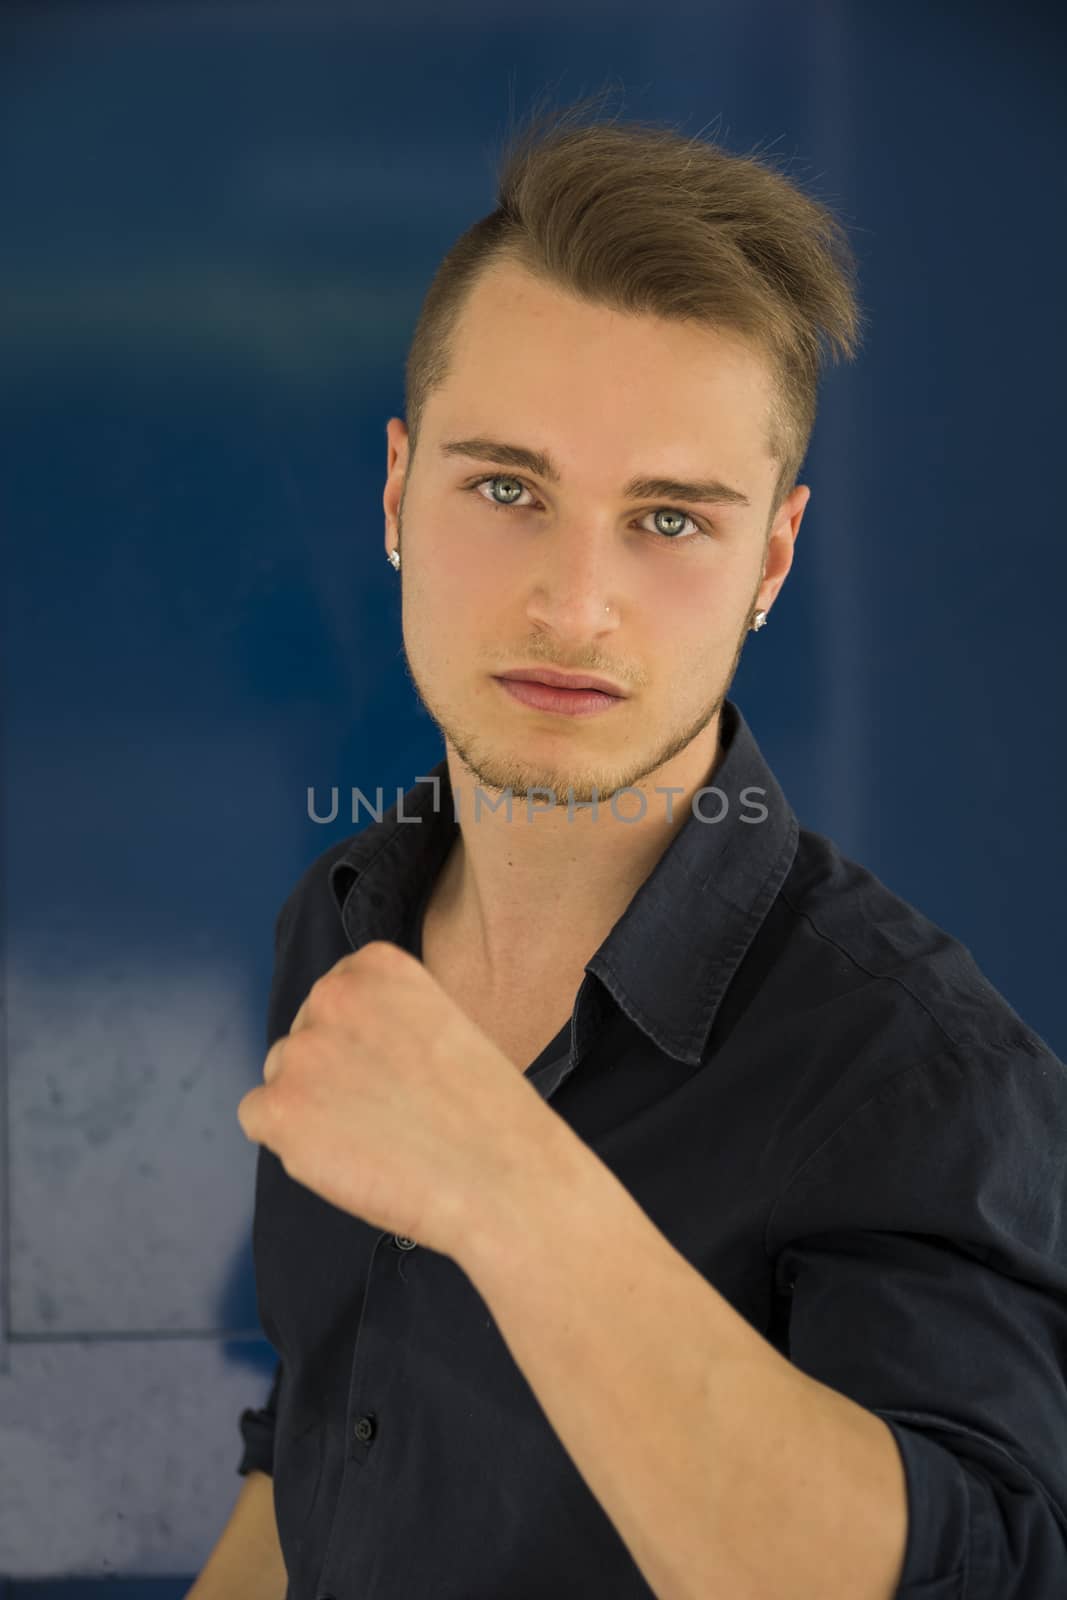 Handsome young man with aggressive expression of challenge by artofphoto